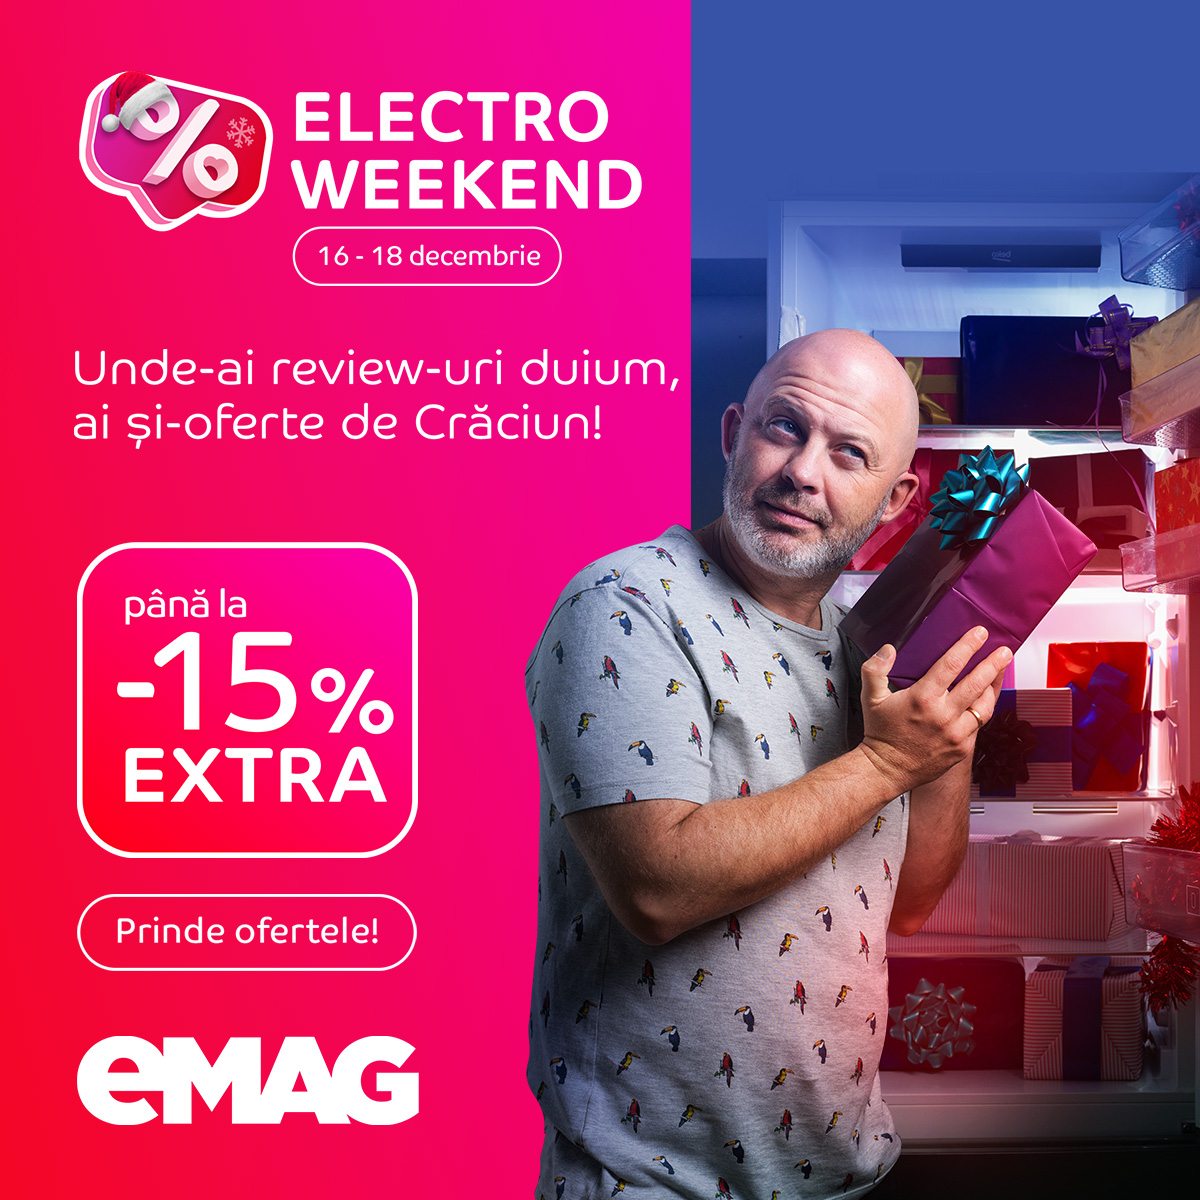 Electro Weekend 16-18 decembrie